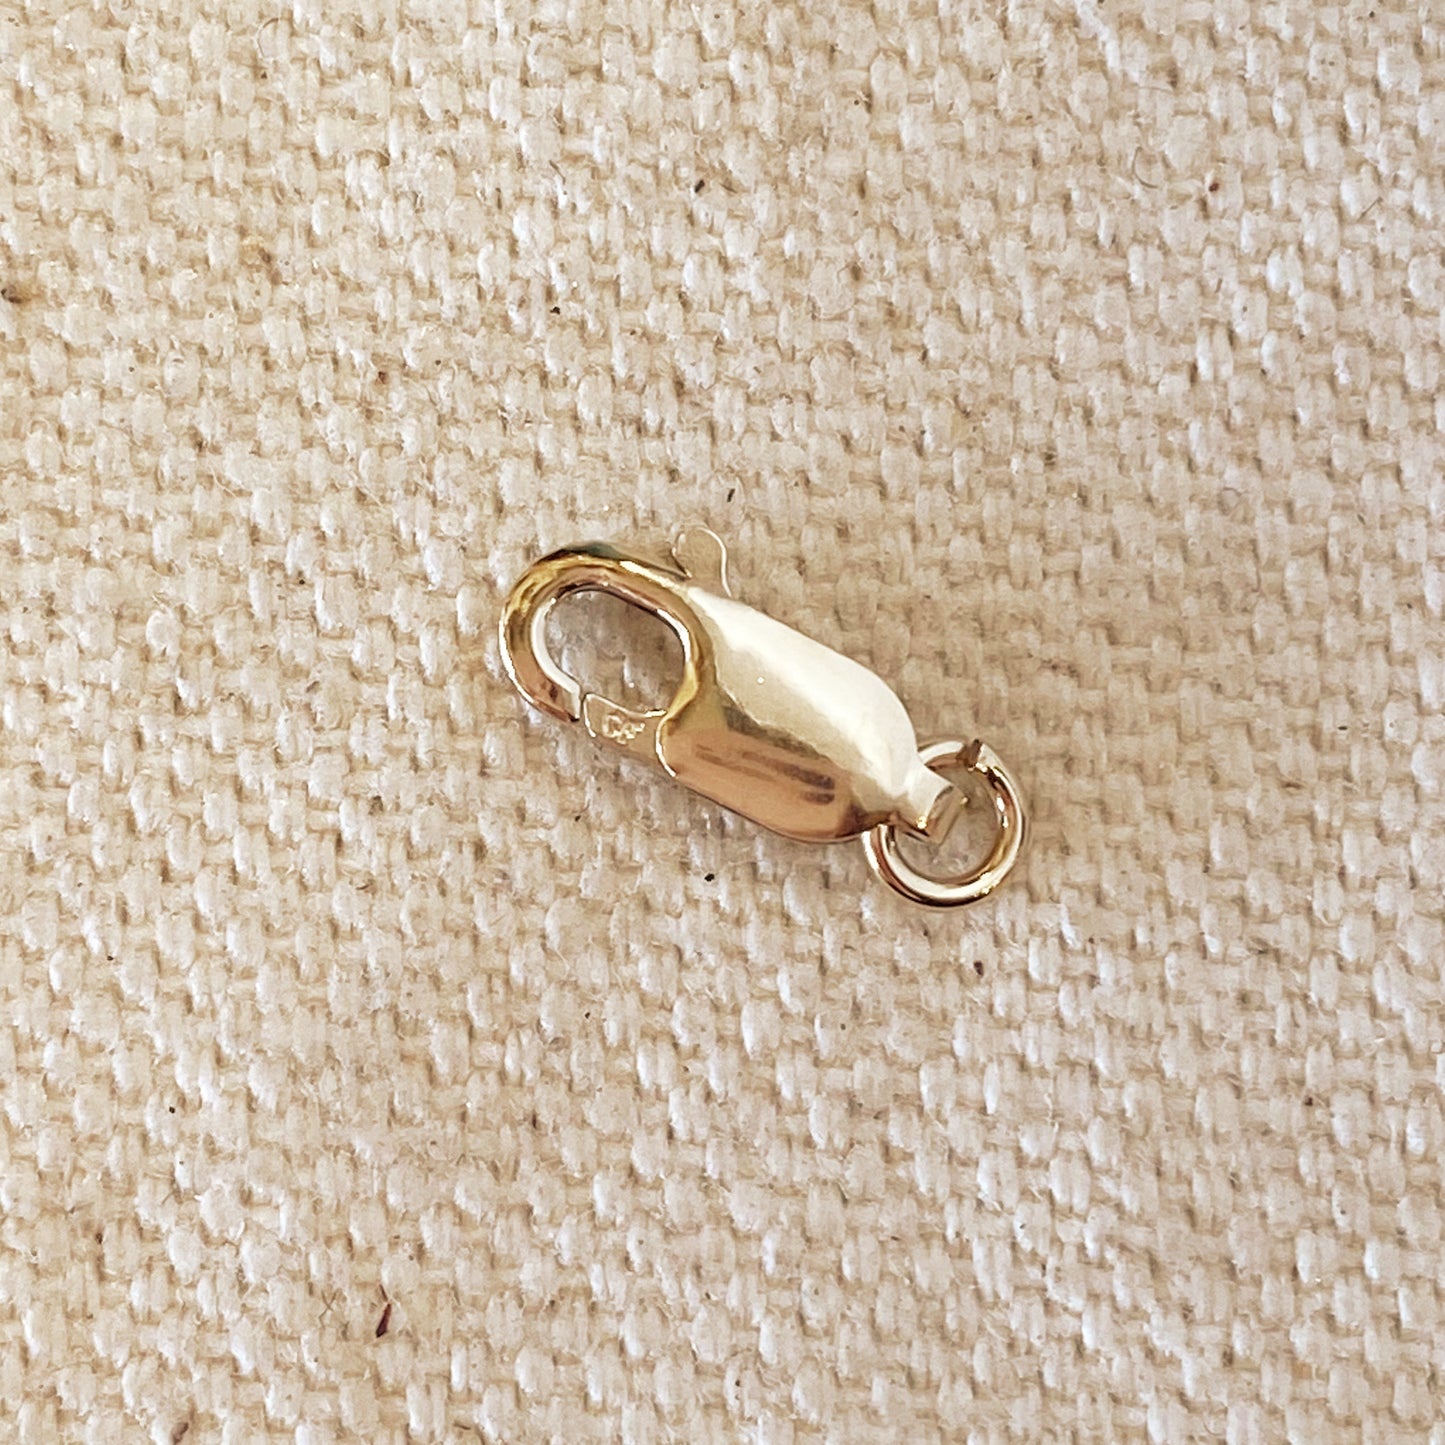 14k Gold Filled Lobster Claw Clasp With Open Ring